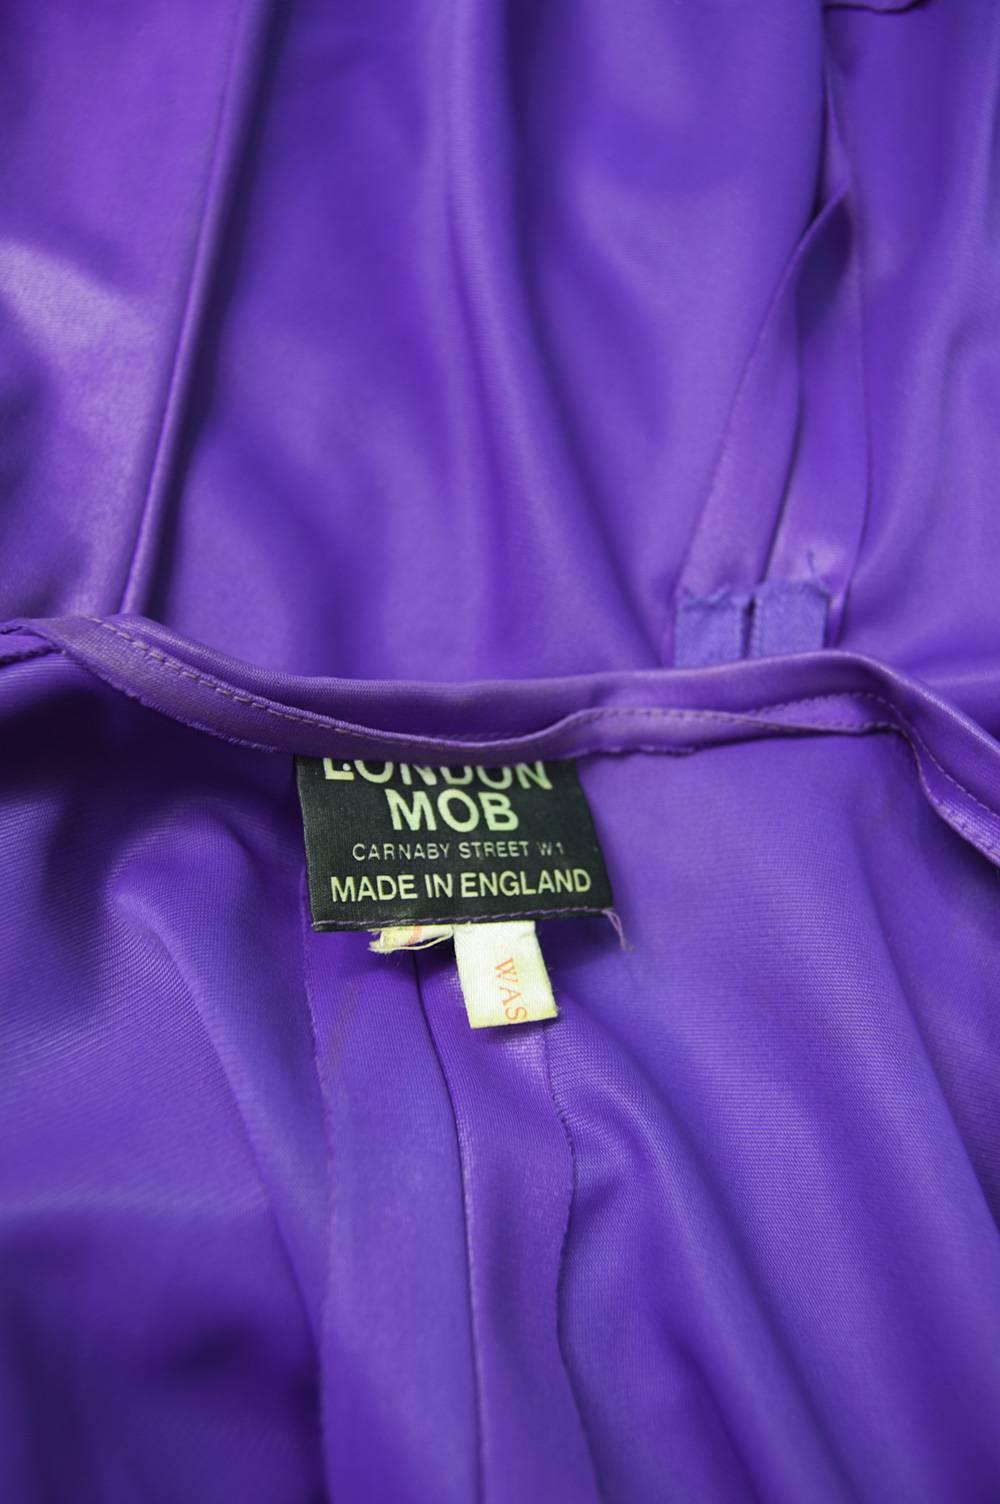 London Mob of Carnaby Street Purple Wet Look Playsuit, 1960s For Sale 3